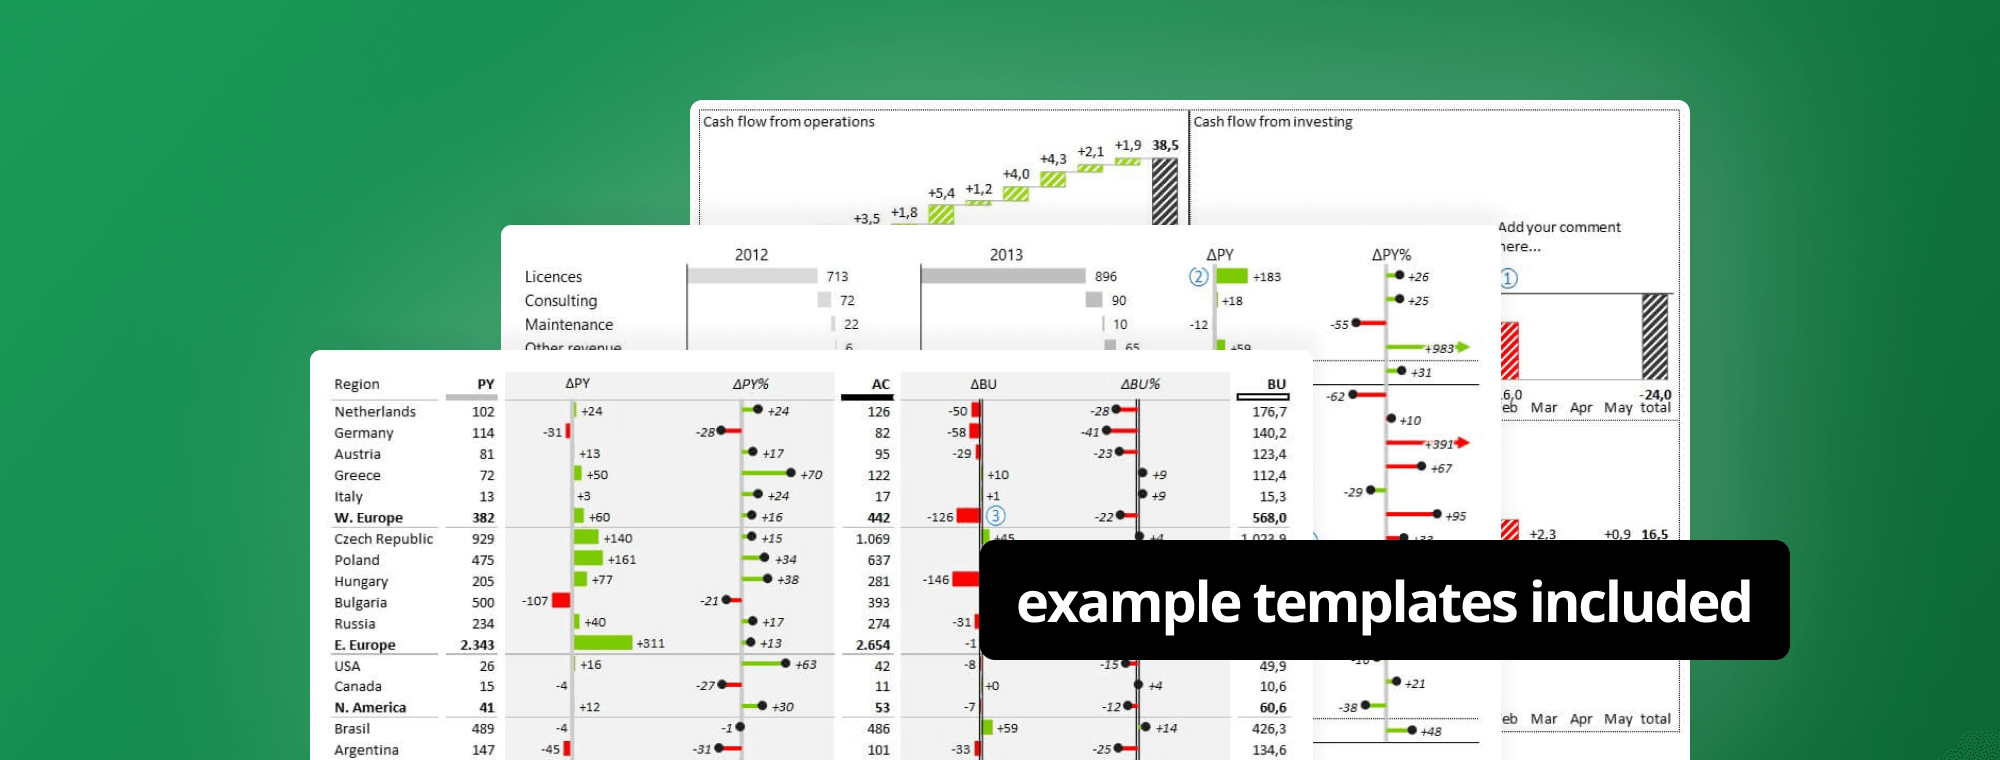 Excel Report Templates: The 23 Essential Templates You